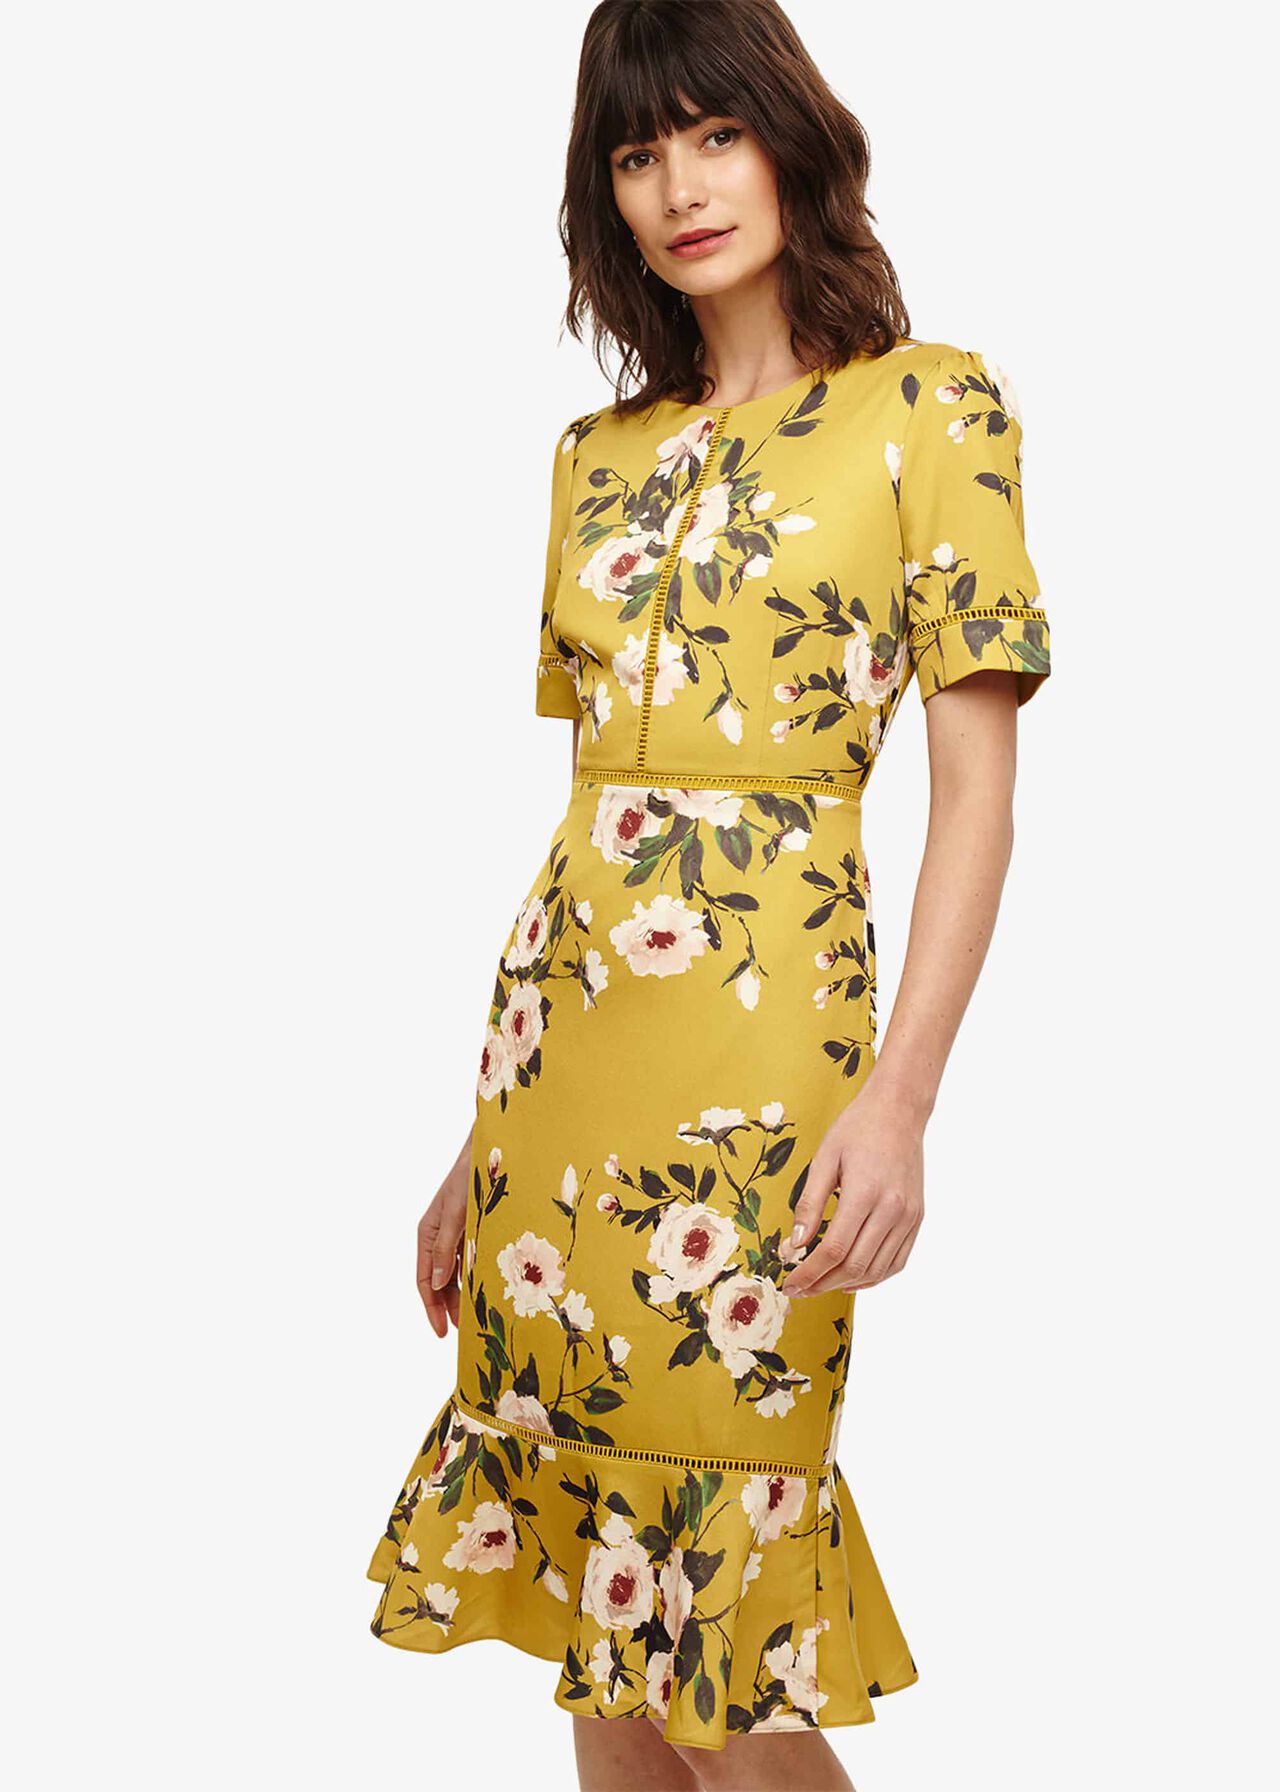 Hilary Floral Dress | Phase Eight